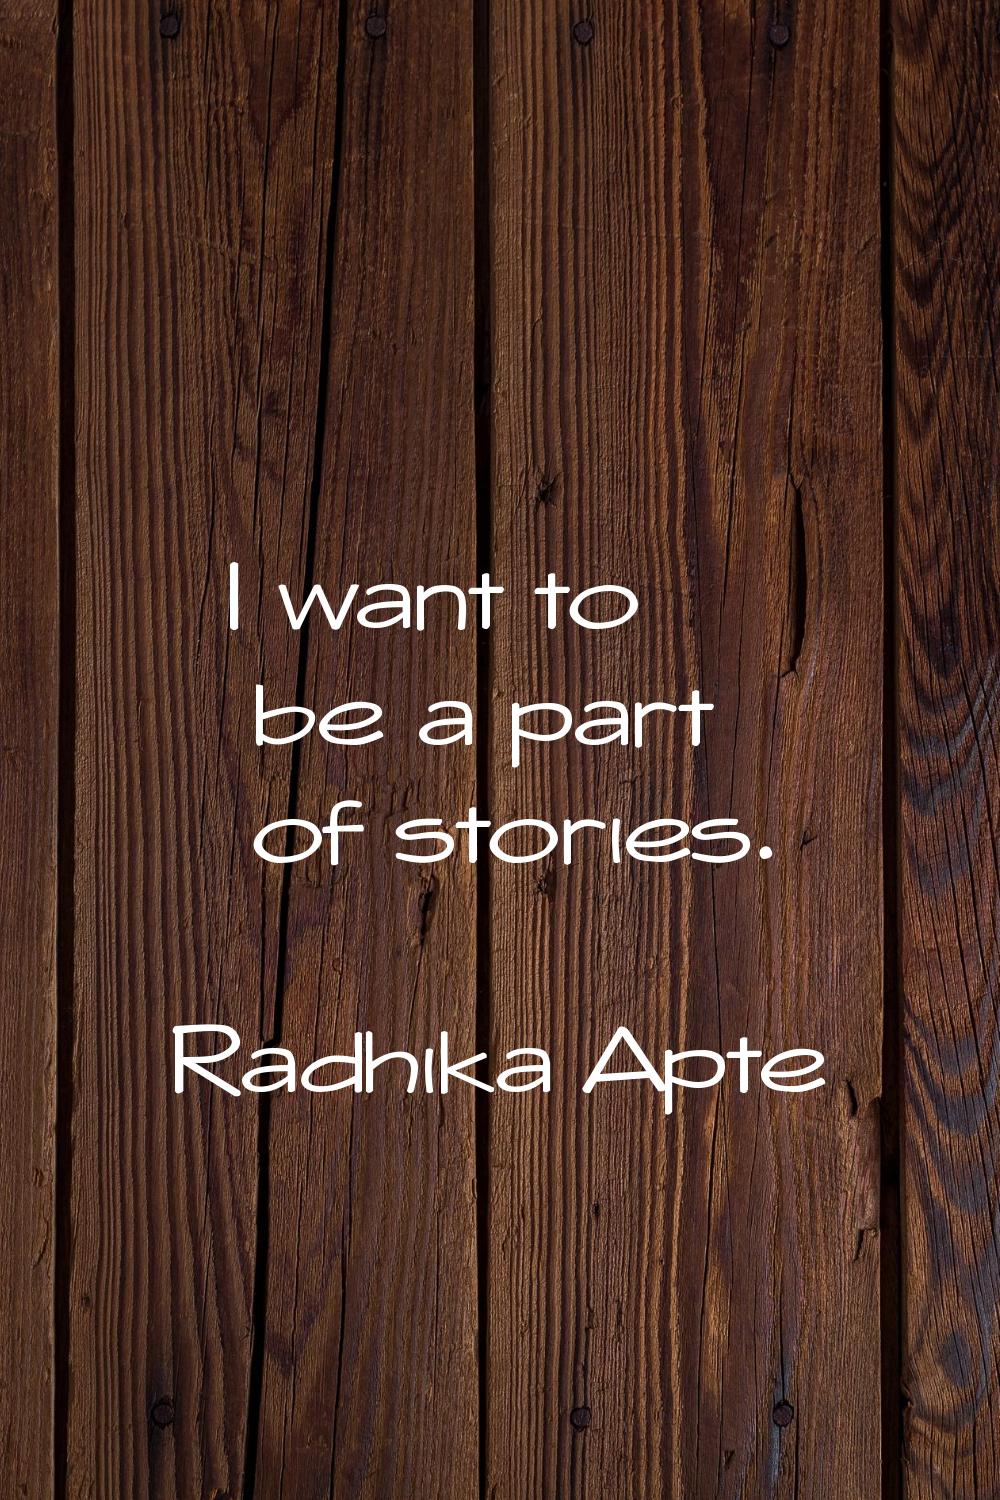 I want to be a part of stories.